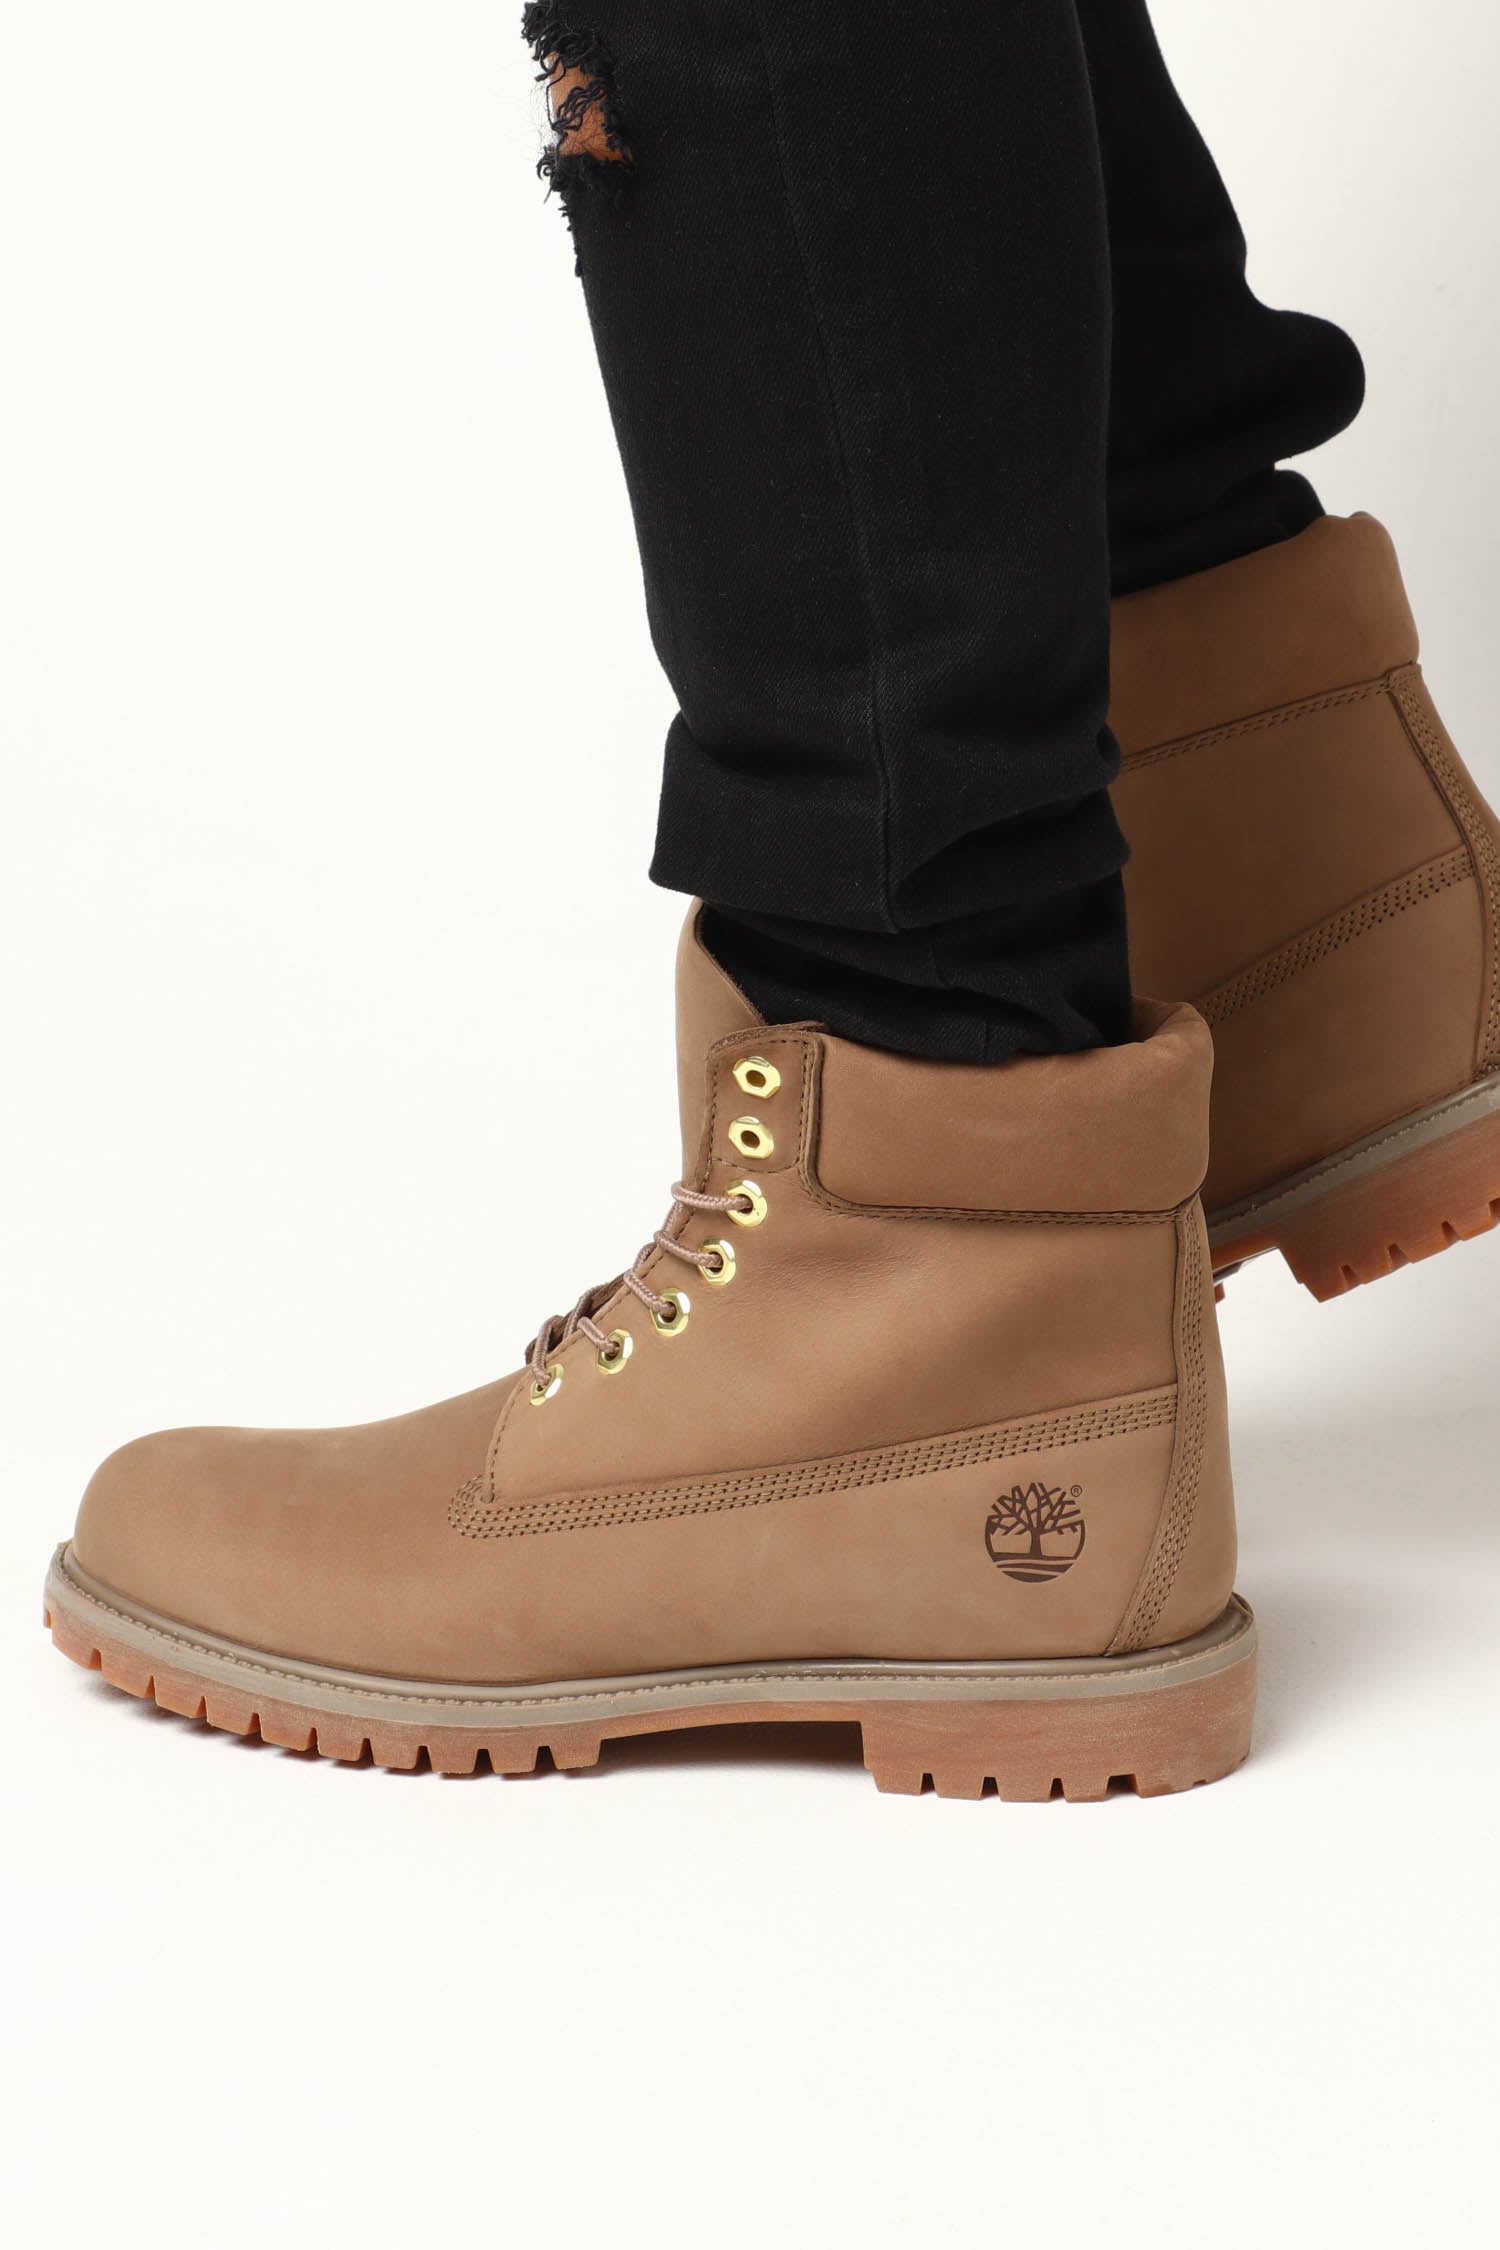 timberland beige boots